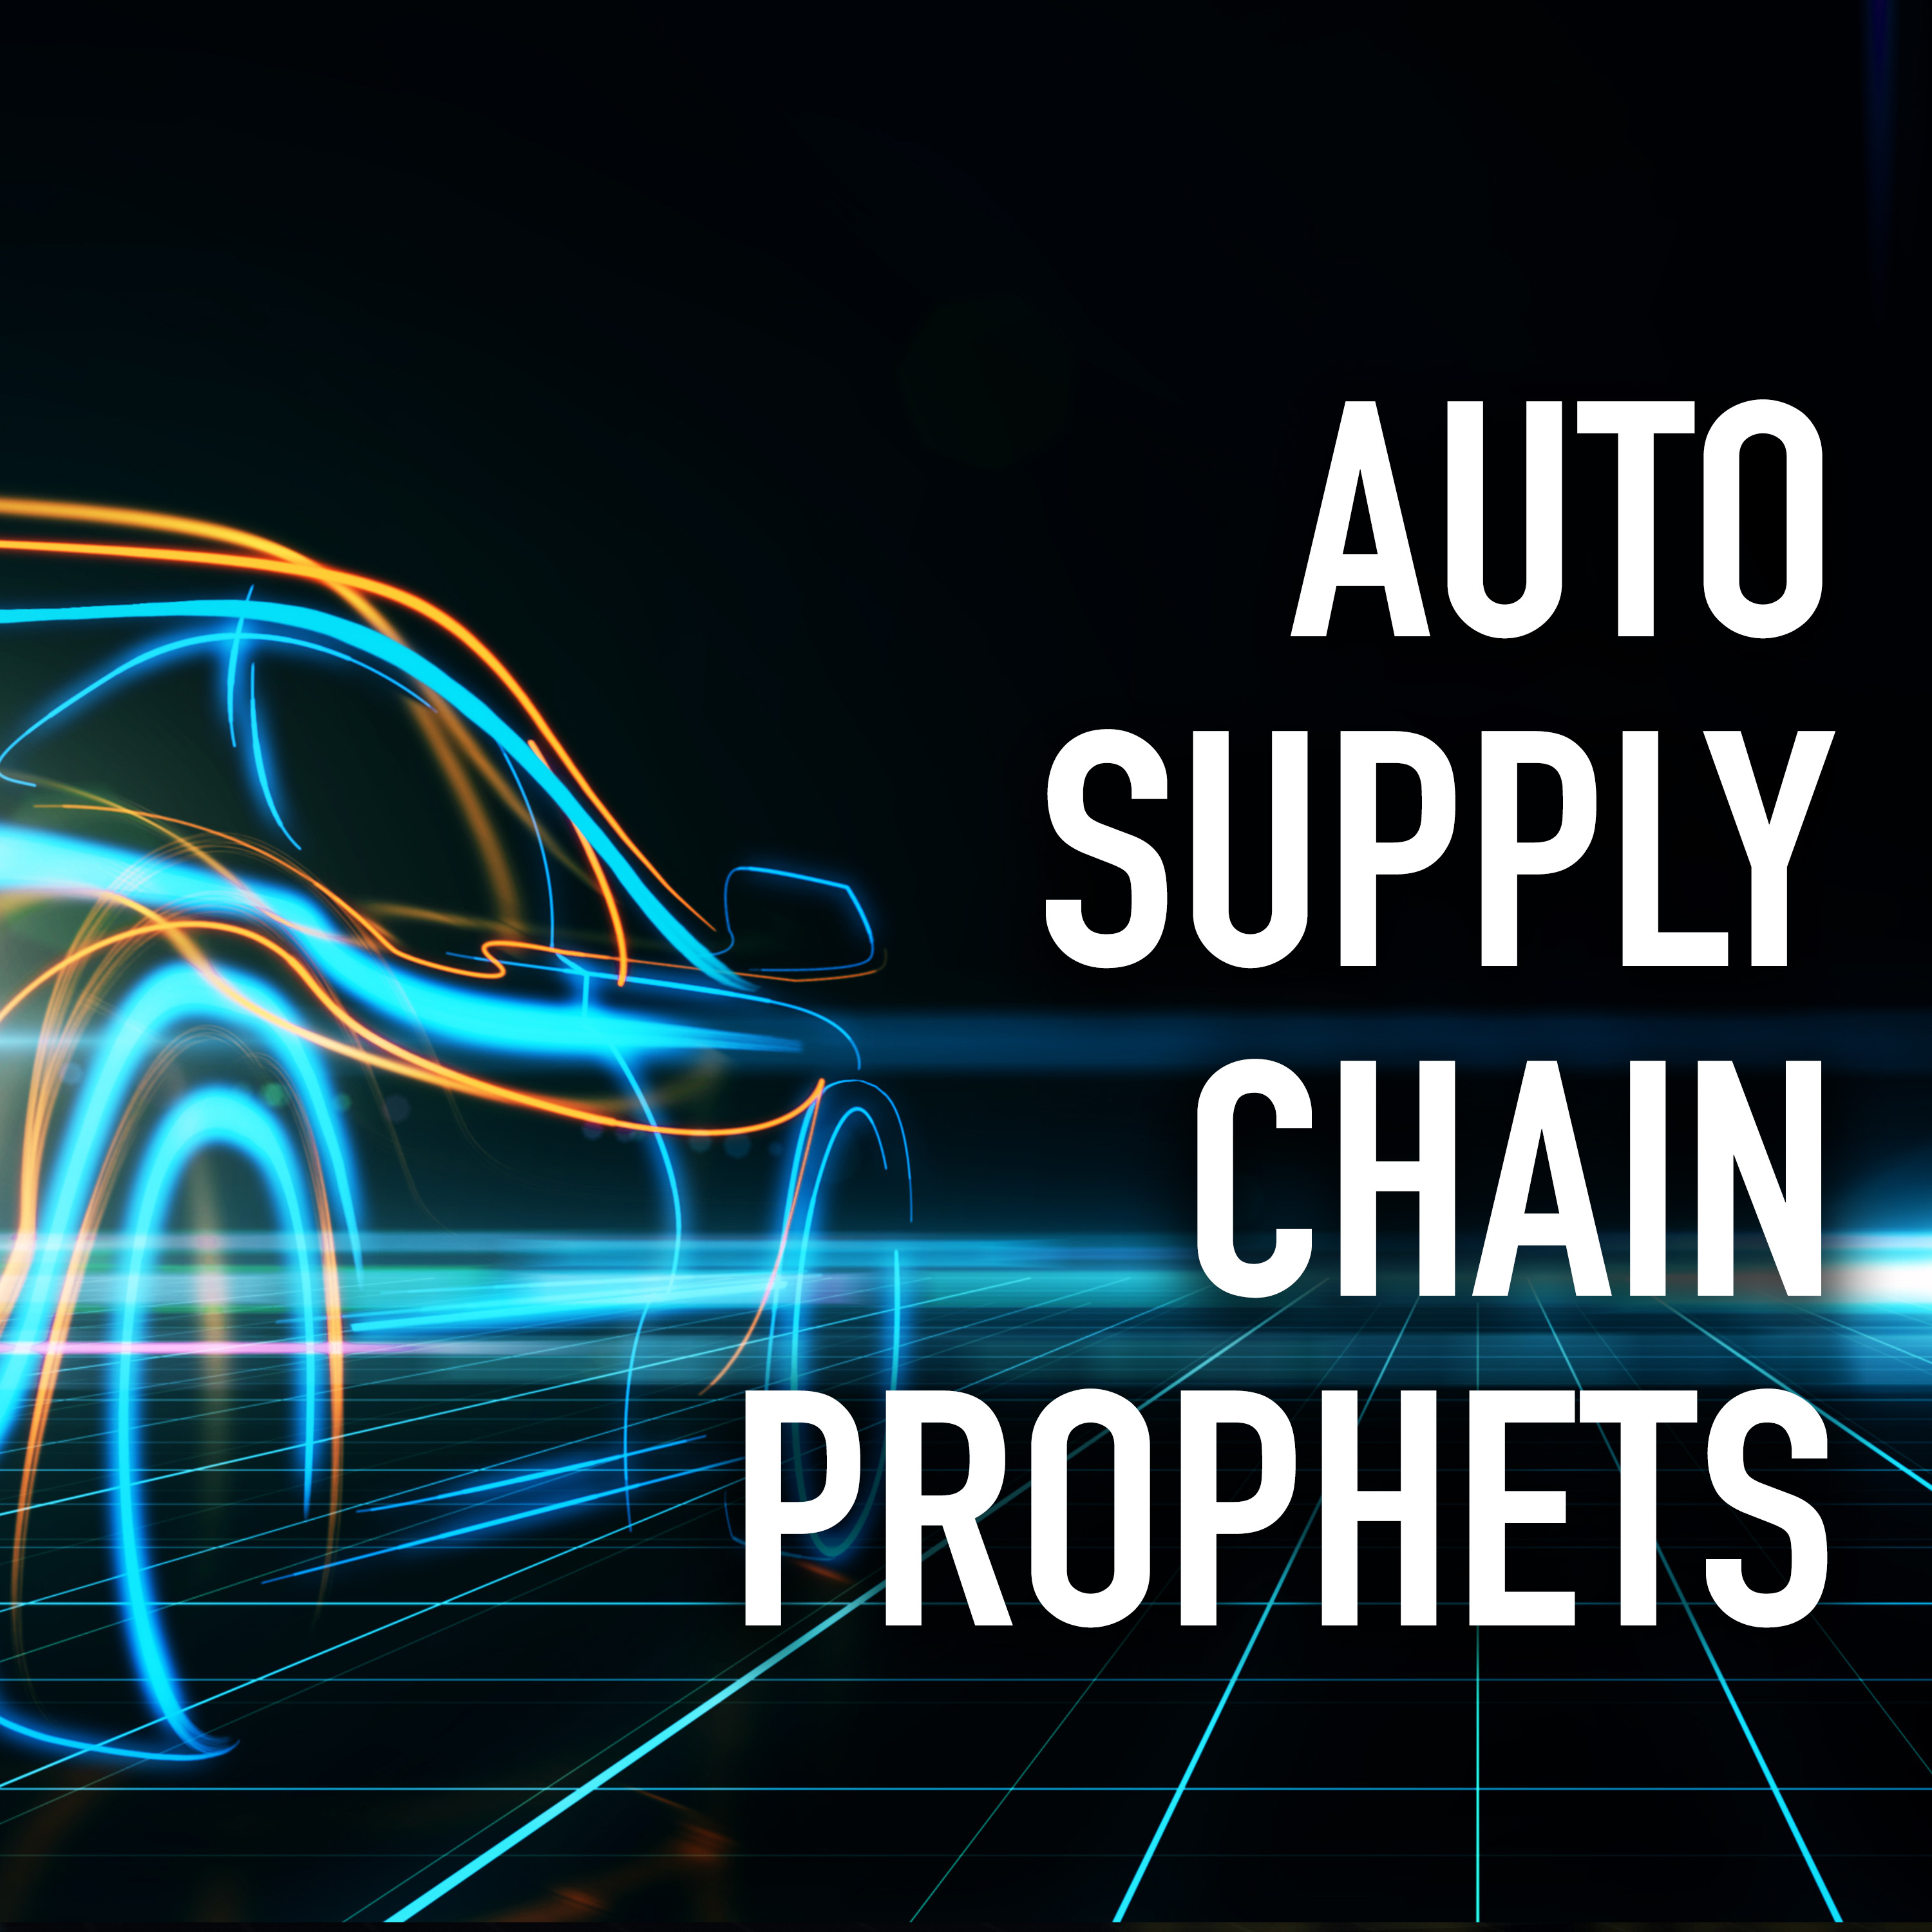 Show artwork for Auto Supply Chain Prophets